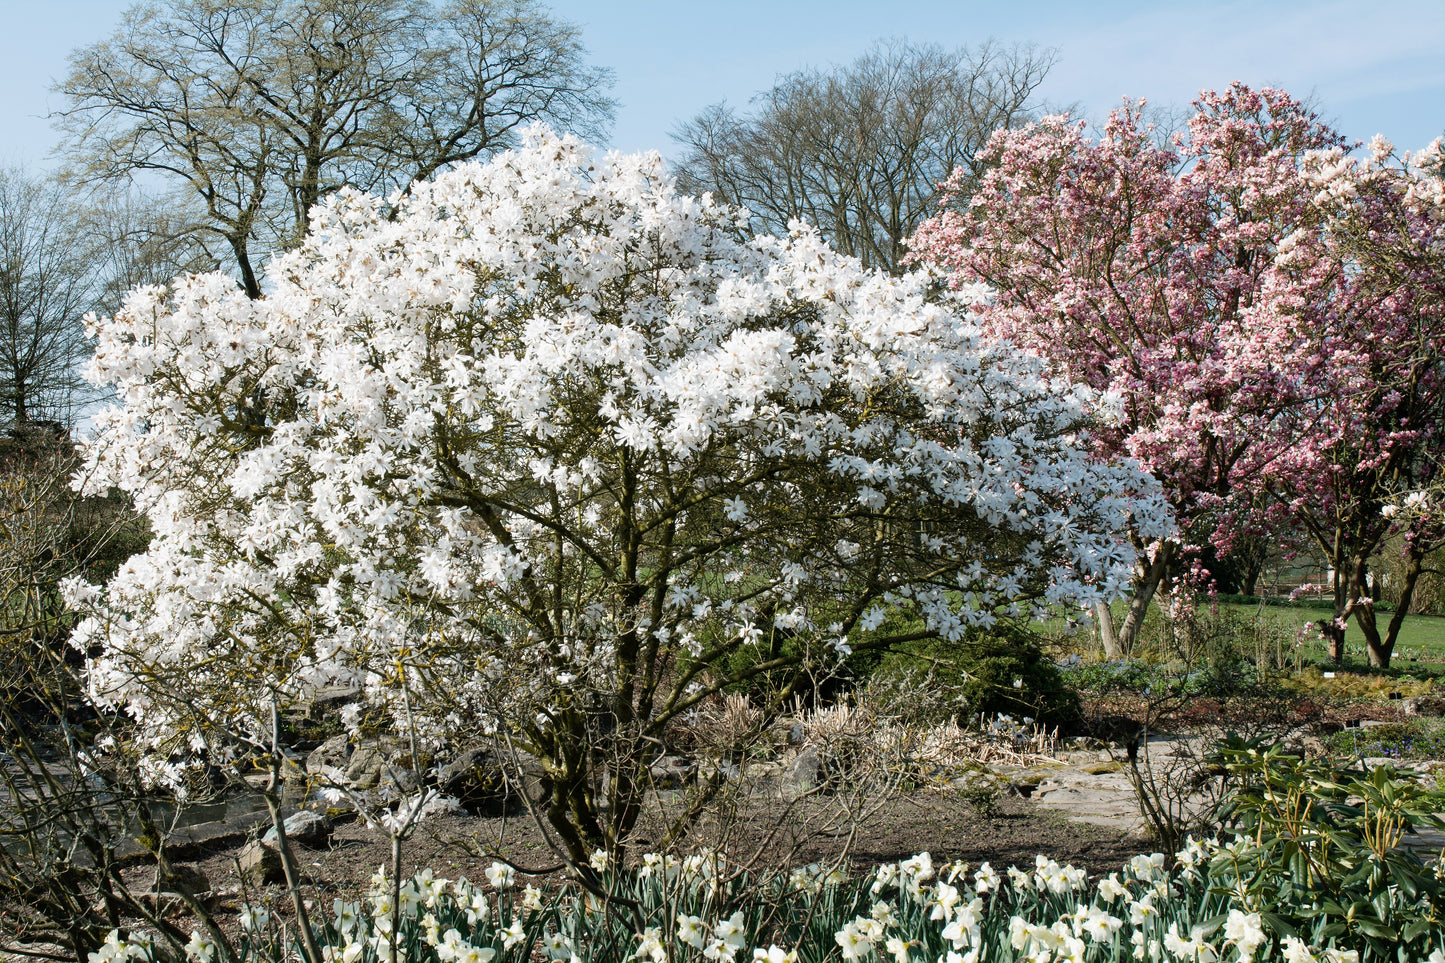 5 STAR MAGNOLIA Stellata TREE Seeds - Fragrant White to Pink Big 4" Wide Flowers